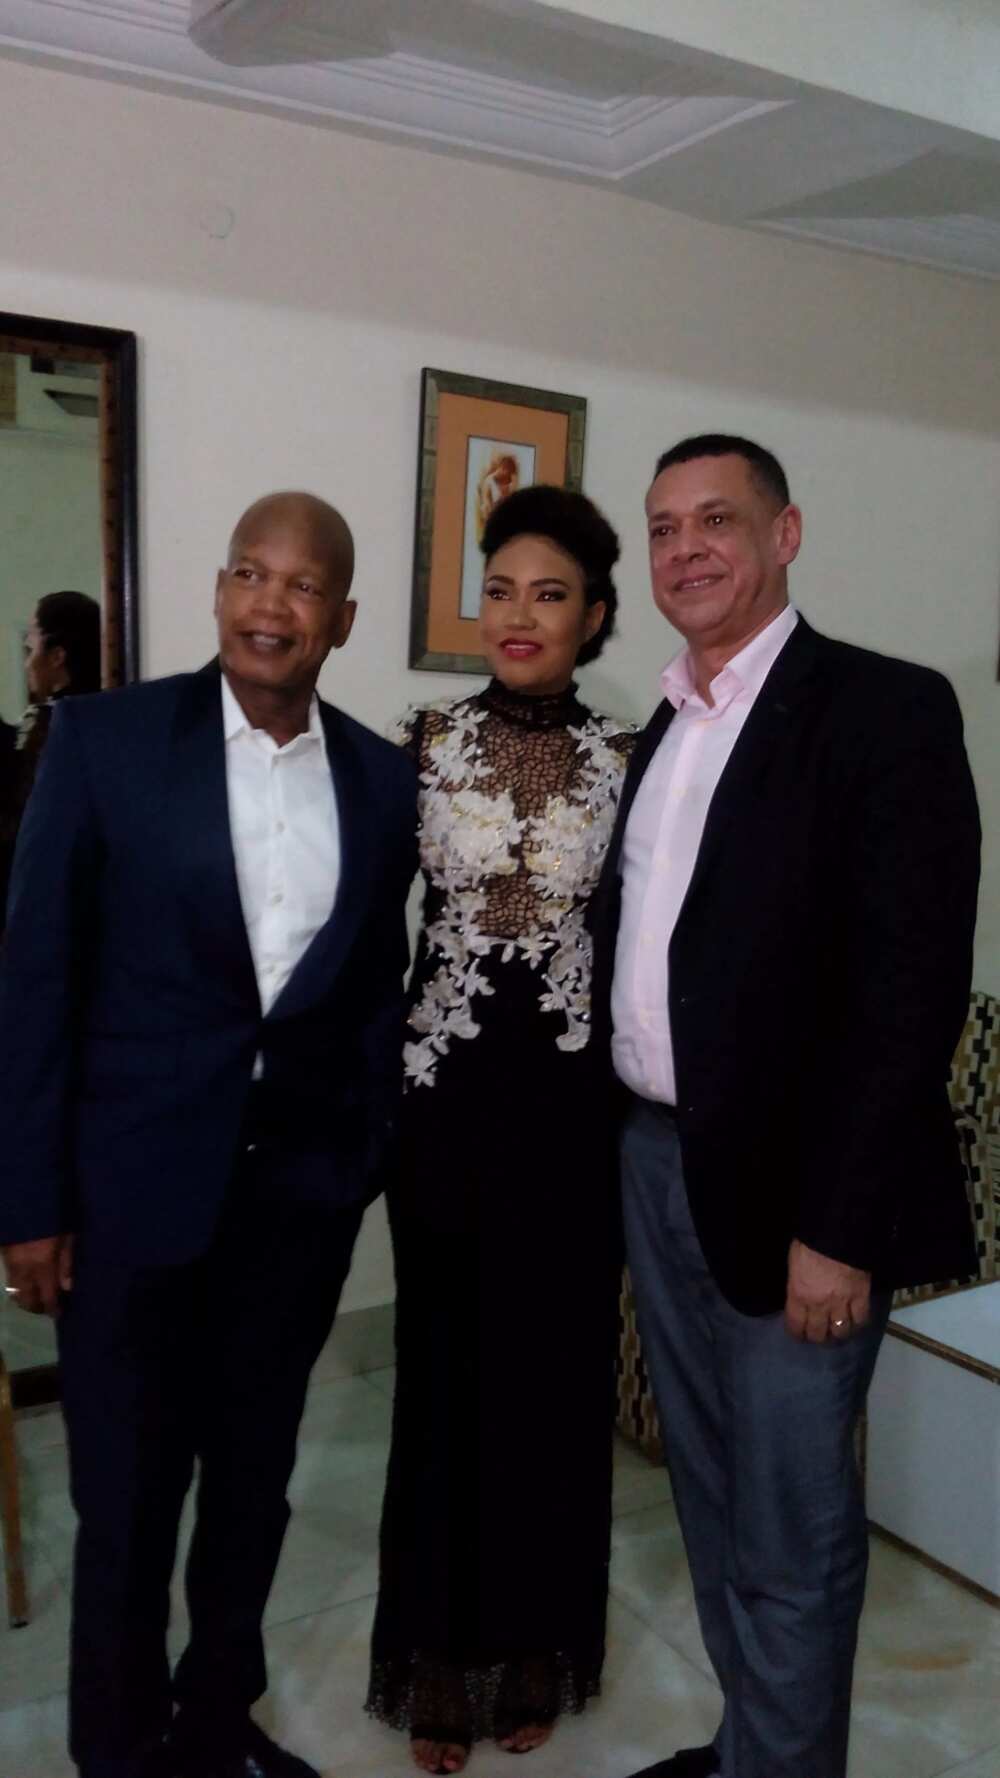 Anna Banner turns father to chaperone as she attends event (photos)